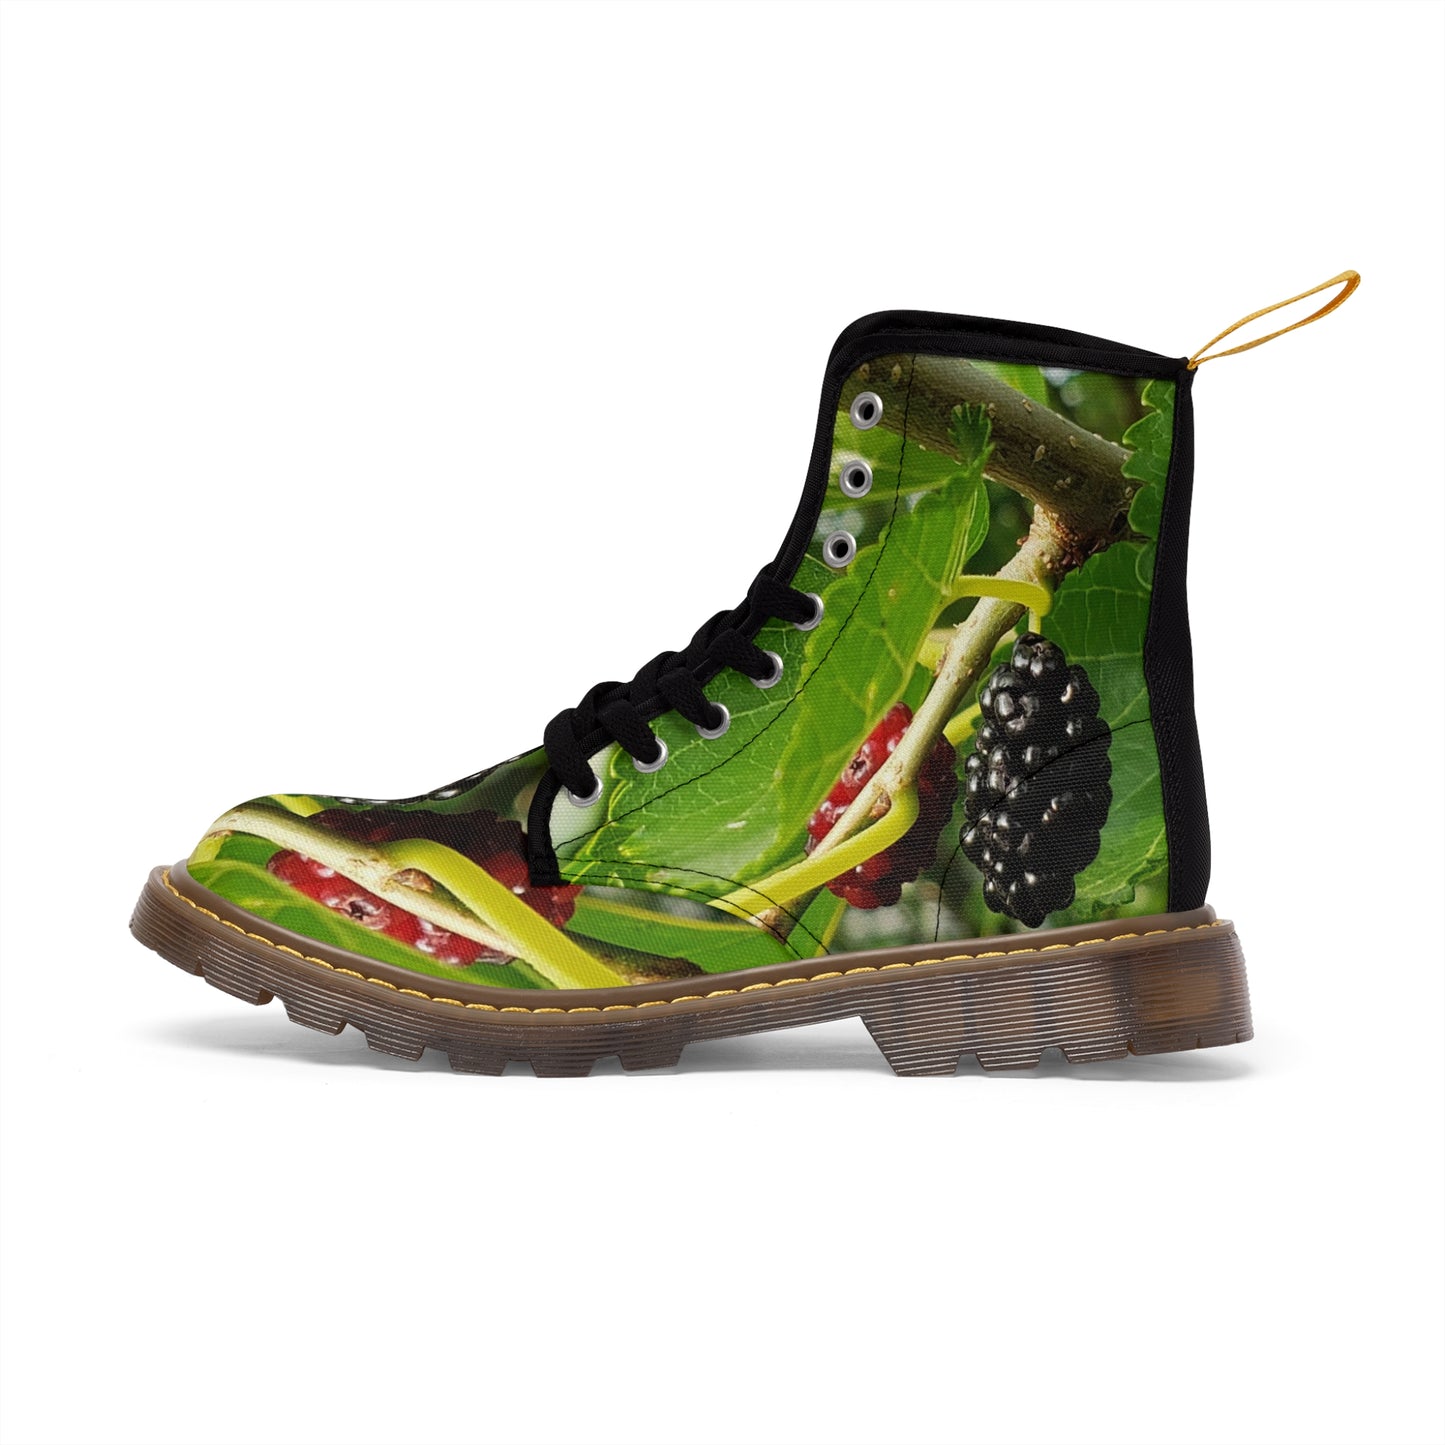 Women's Canvas Boots "Mulberry Tree"